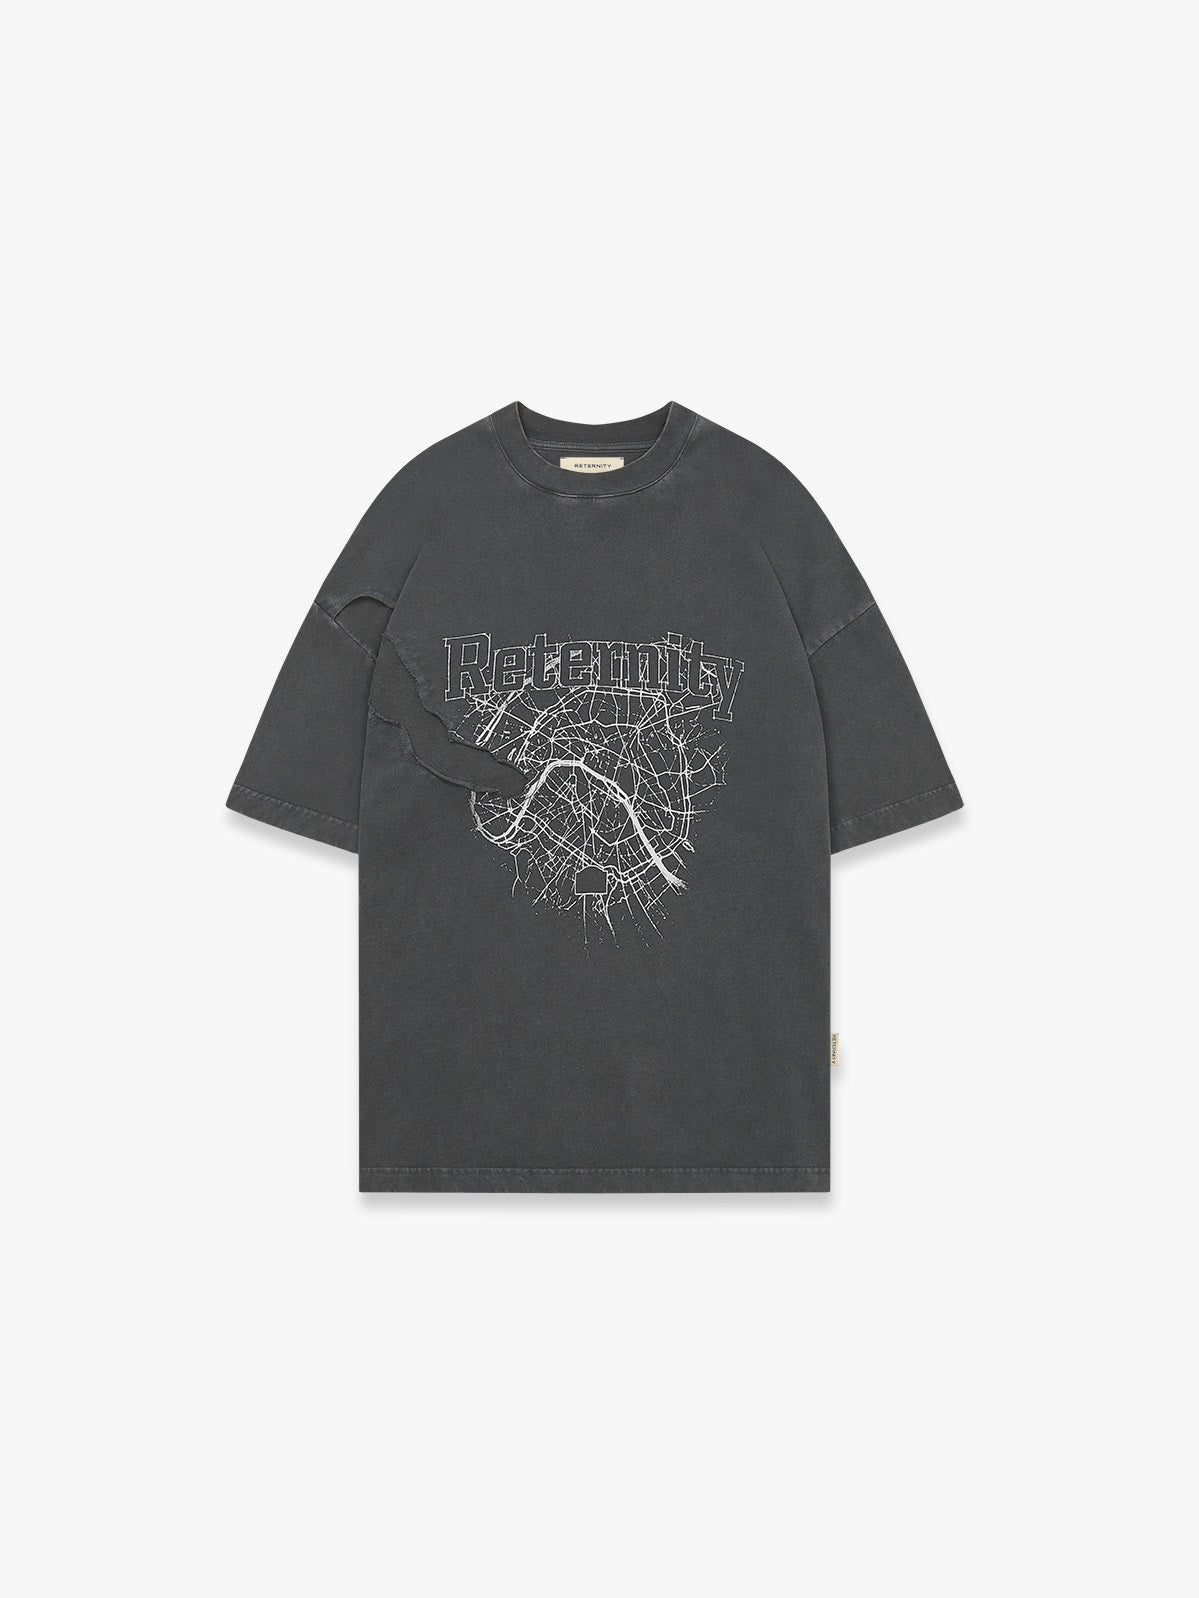 SHATTERED T-SHIRT - WASHED GREY